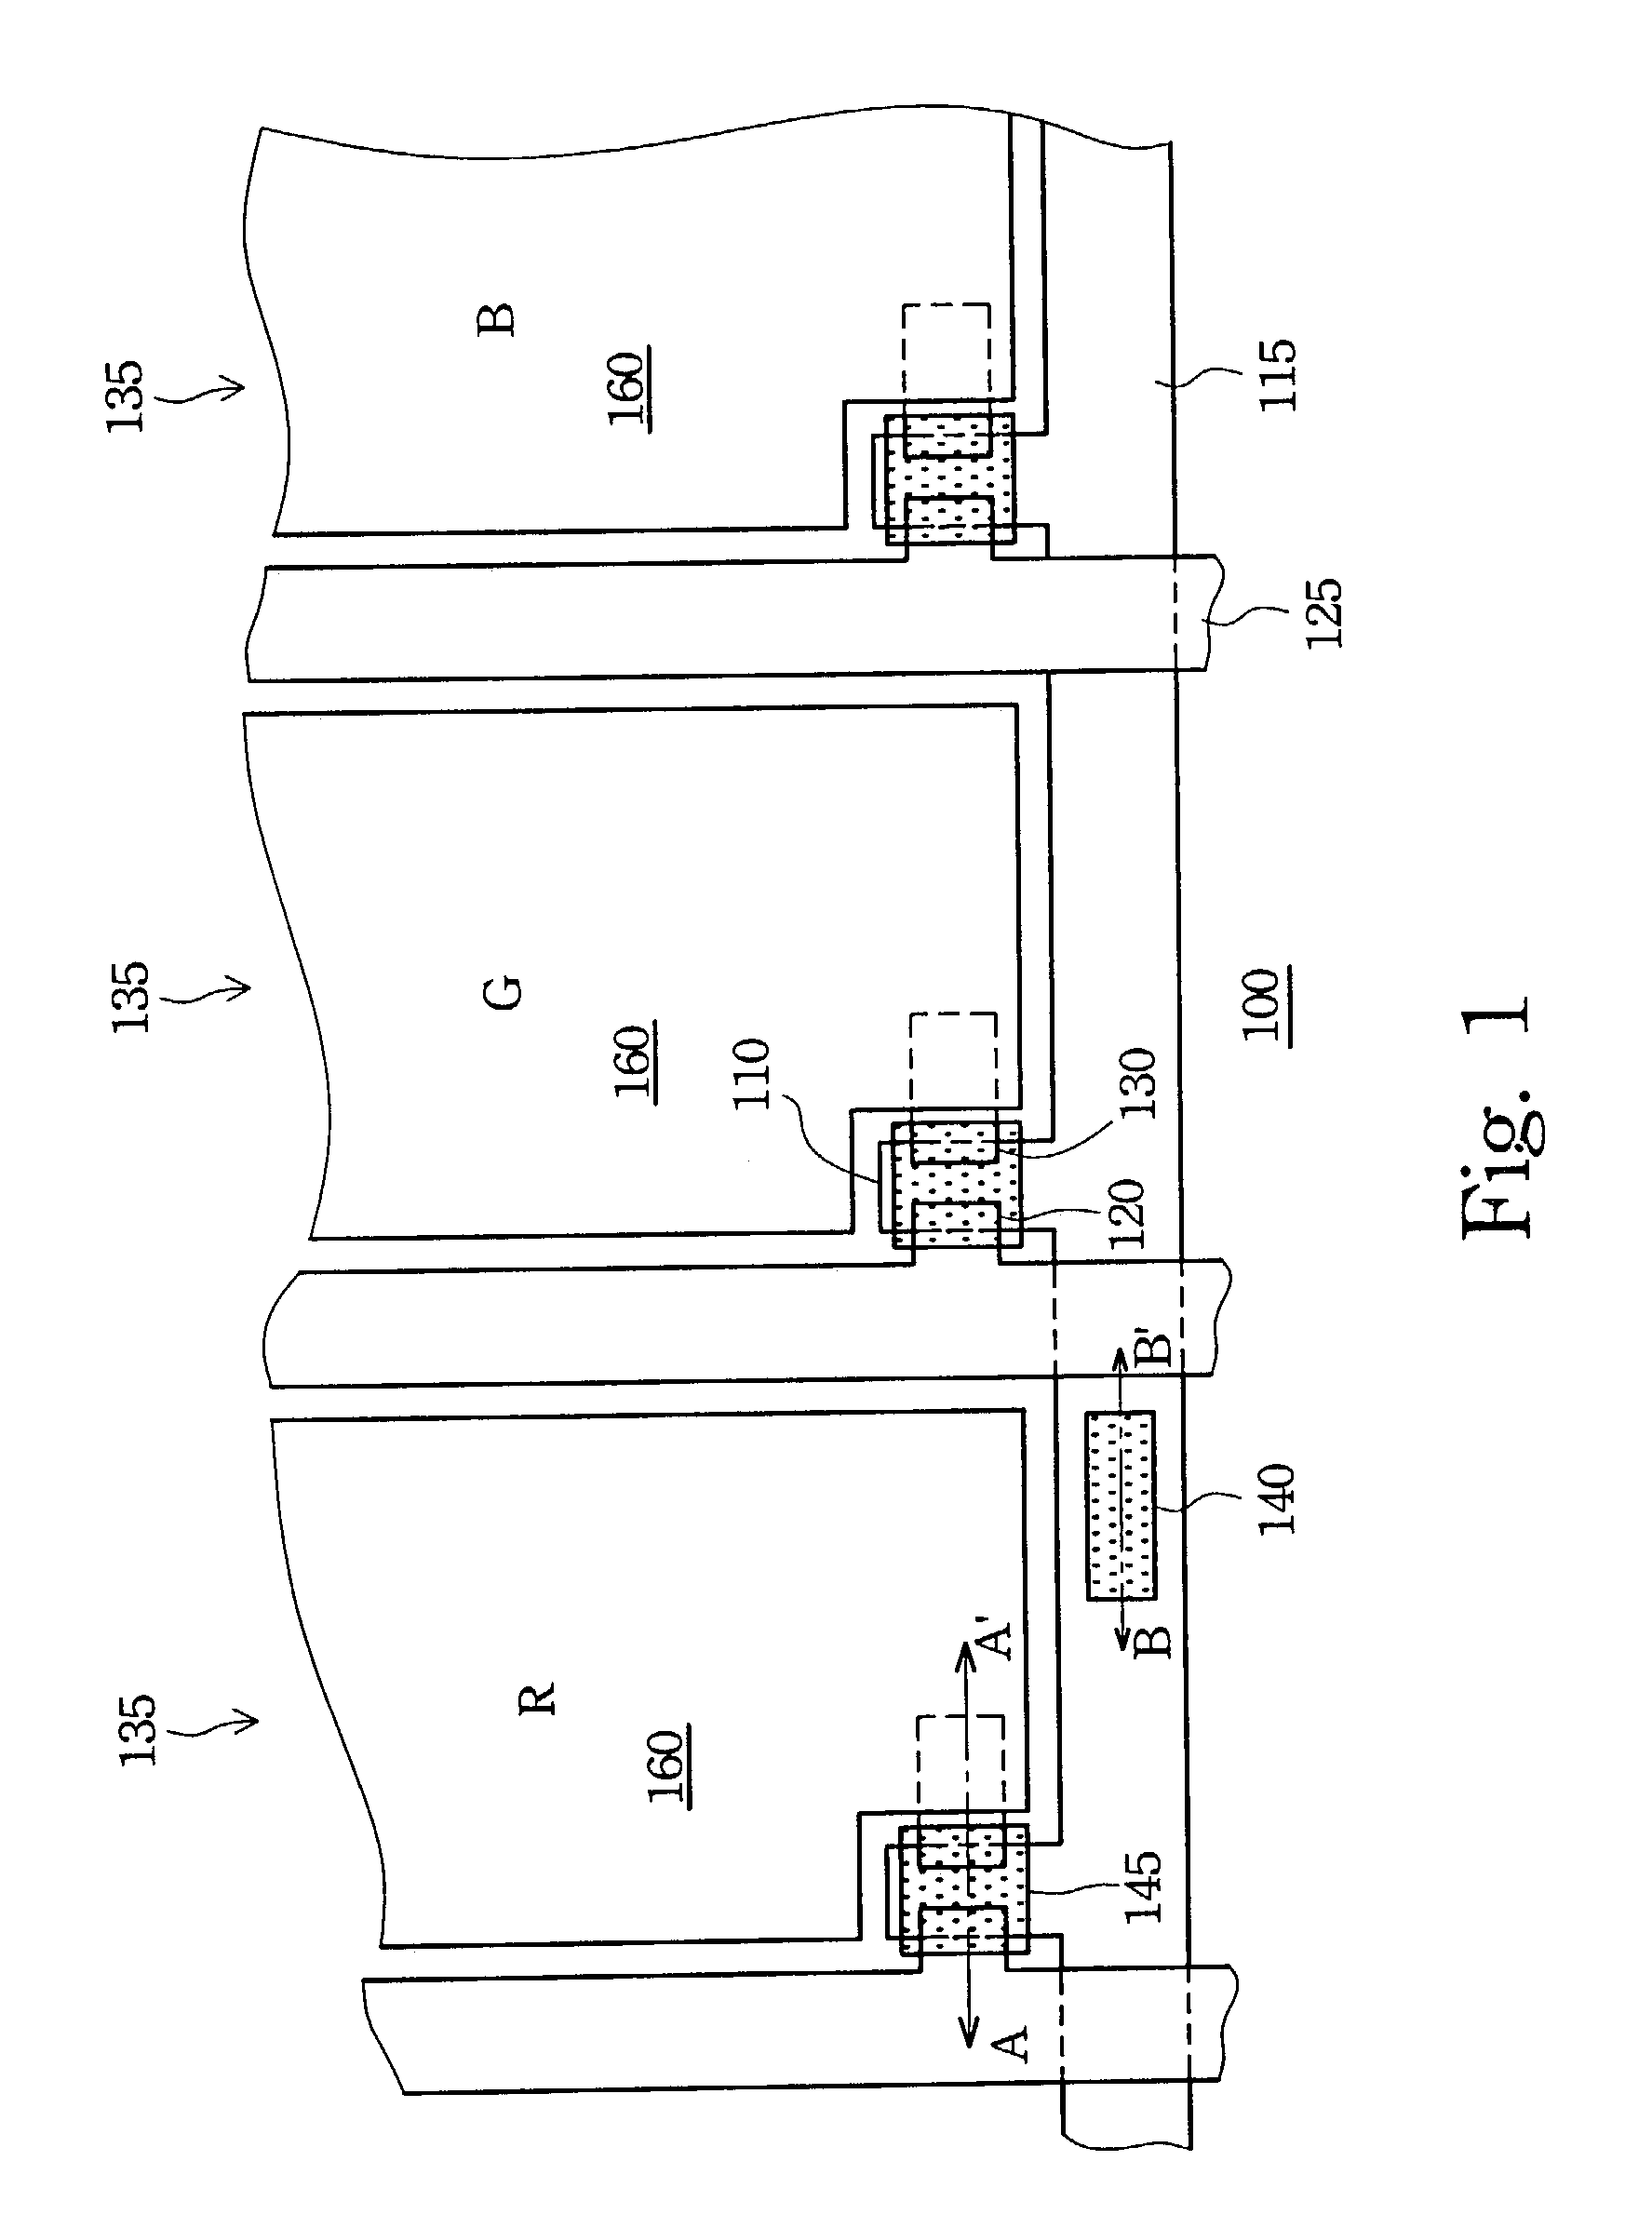 Method of utilizing dual-layer photoresist to form black matrixes and spacers on a control circuit substrate